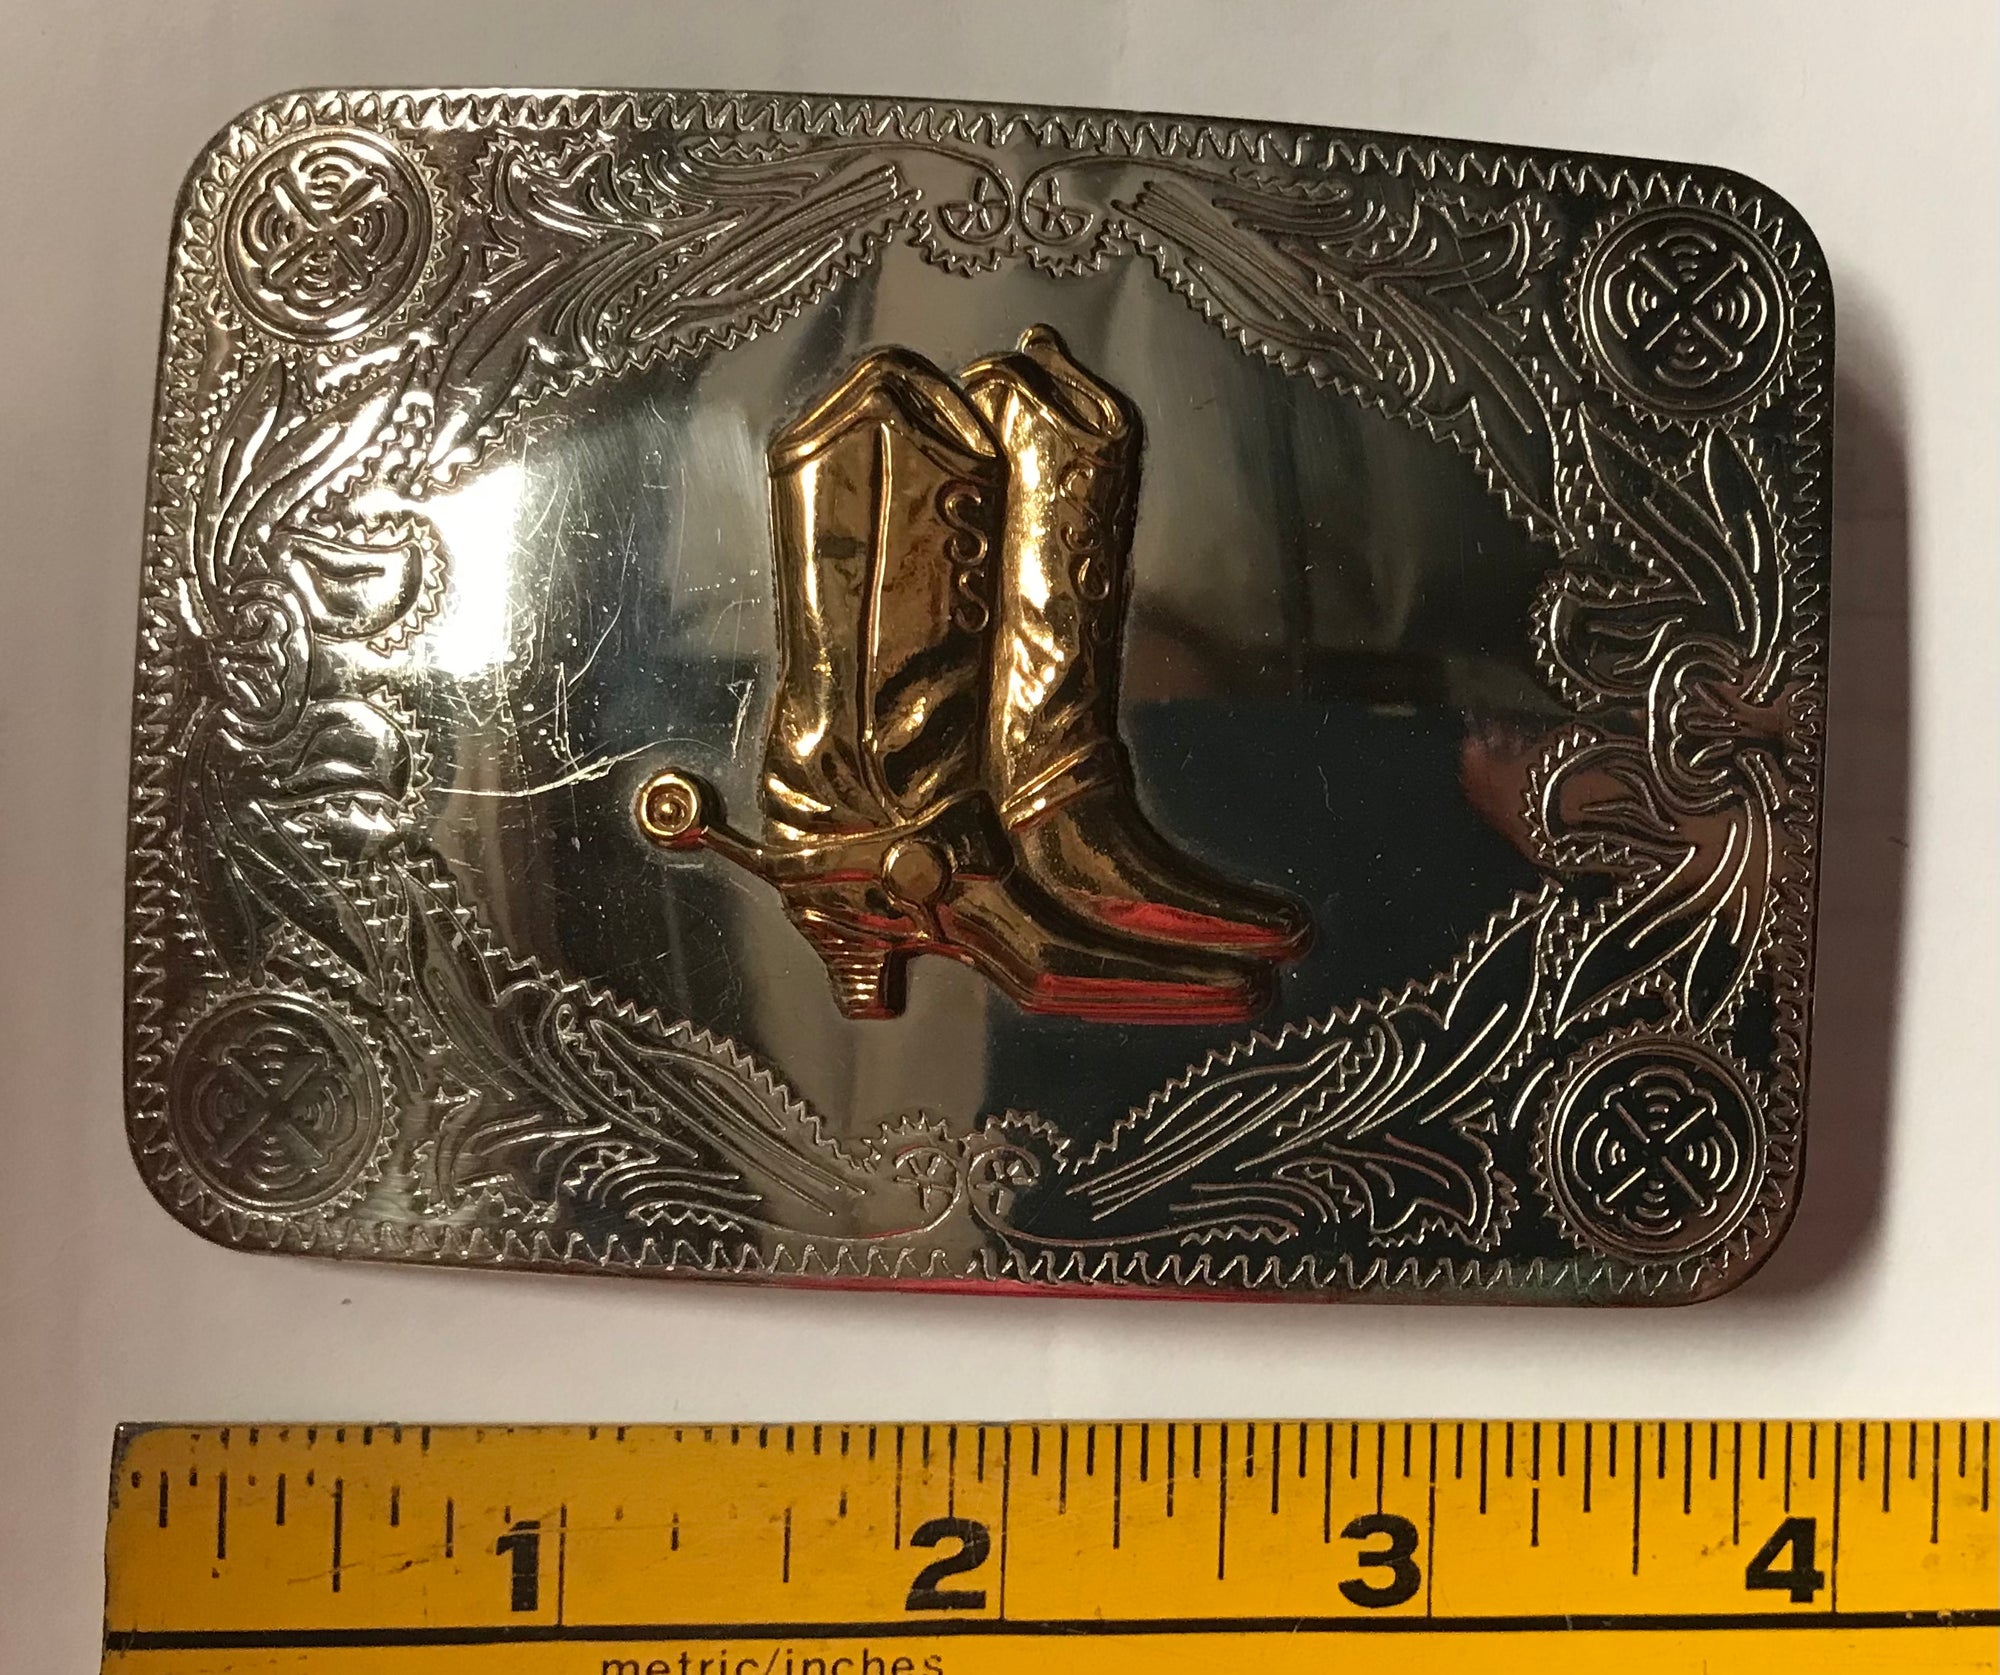 A Square Dance Buckle featuring a cowboy boot design by Square Up Fashions.